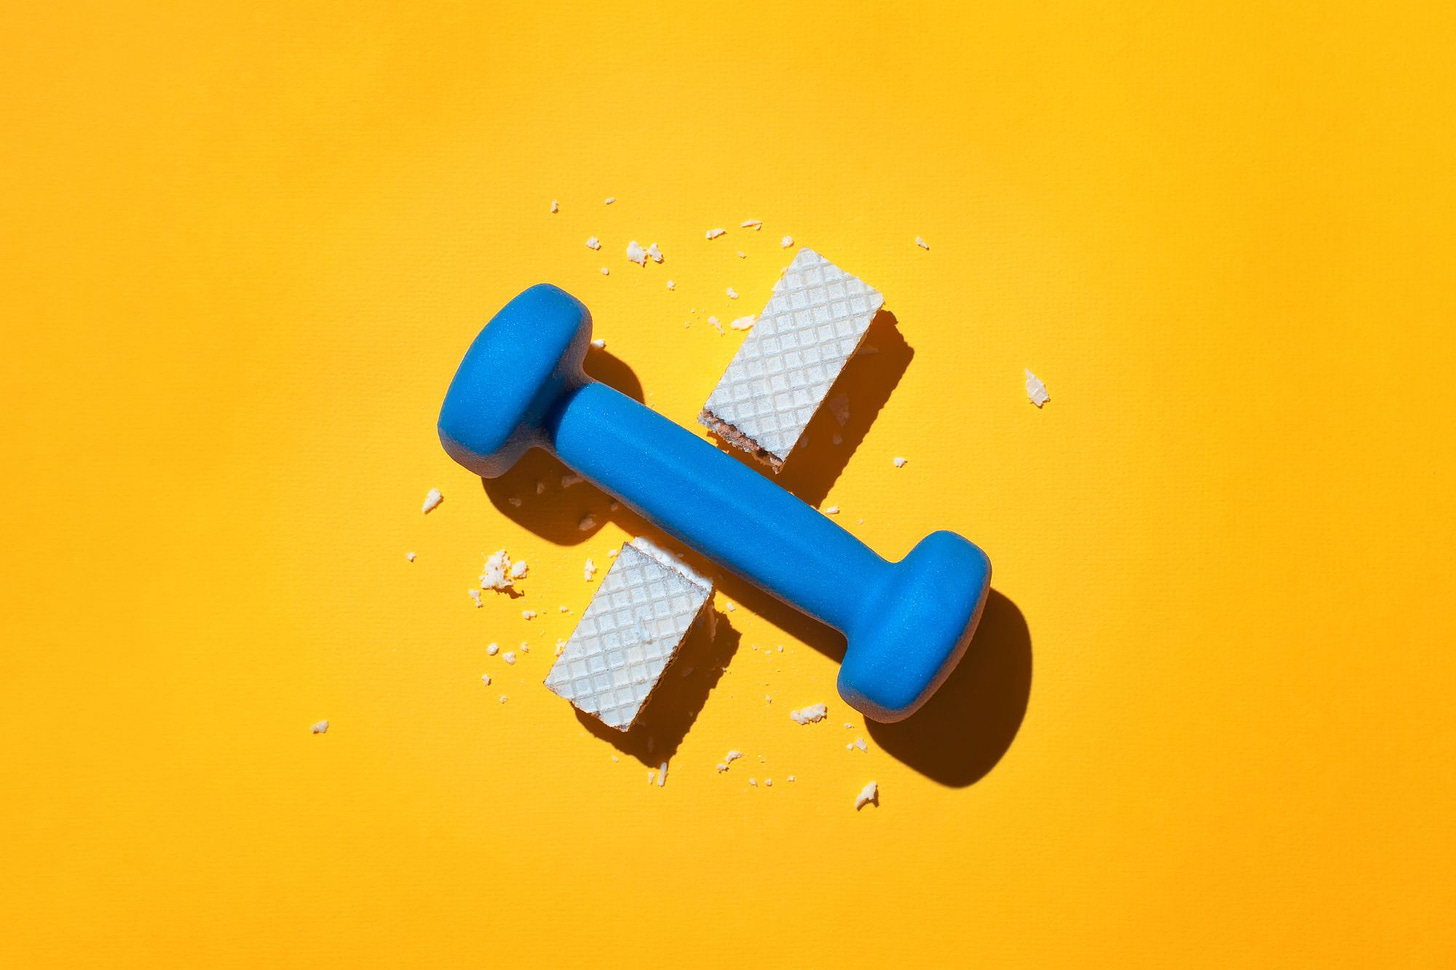 A blue dumbell droped on the wafer